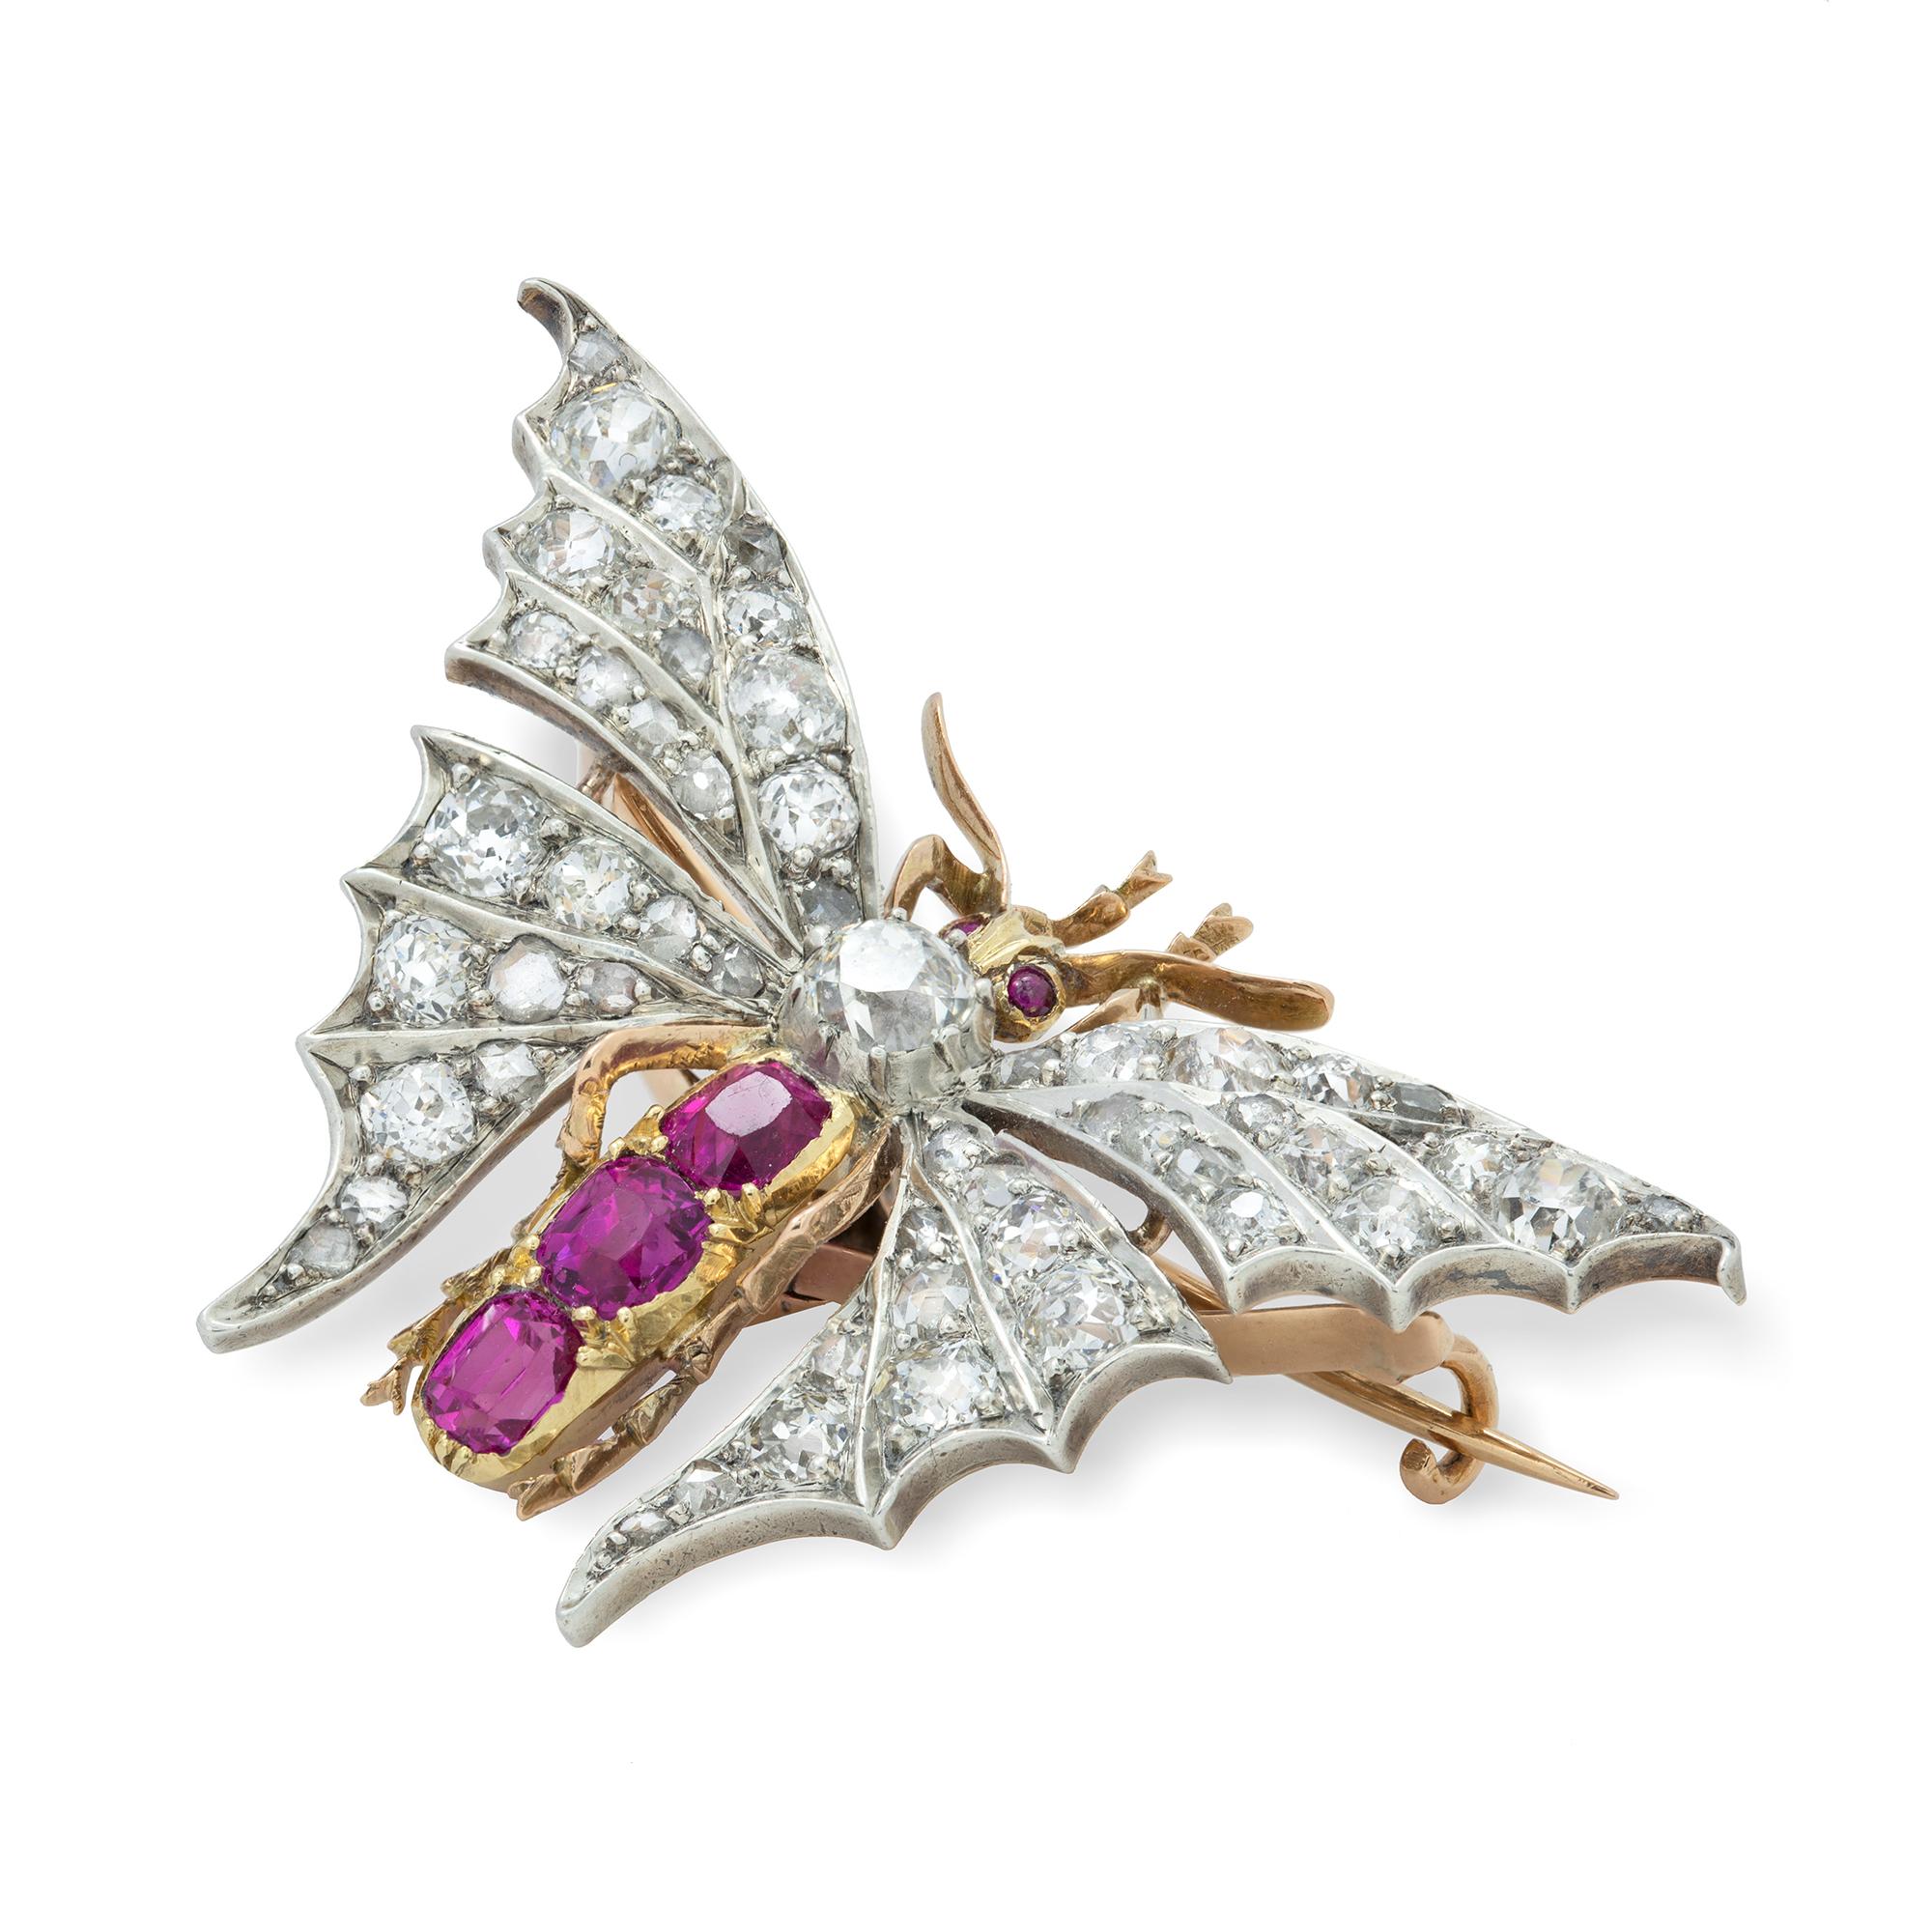 A late Victorian Burmese ruby and diamond butterfly brooch, the thorax and wings set with old European and rose-cut diamonds weighing approximately 4 carats in total, the abdomen and eyes set with faceted rubies, weighing approximately 1.3 carats in